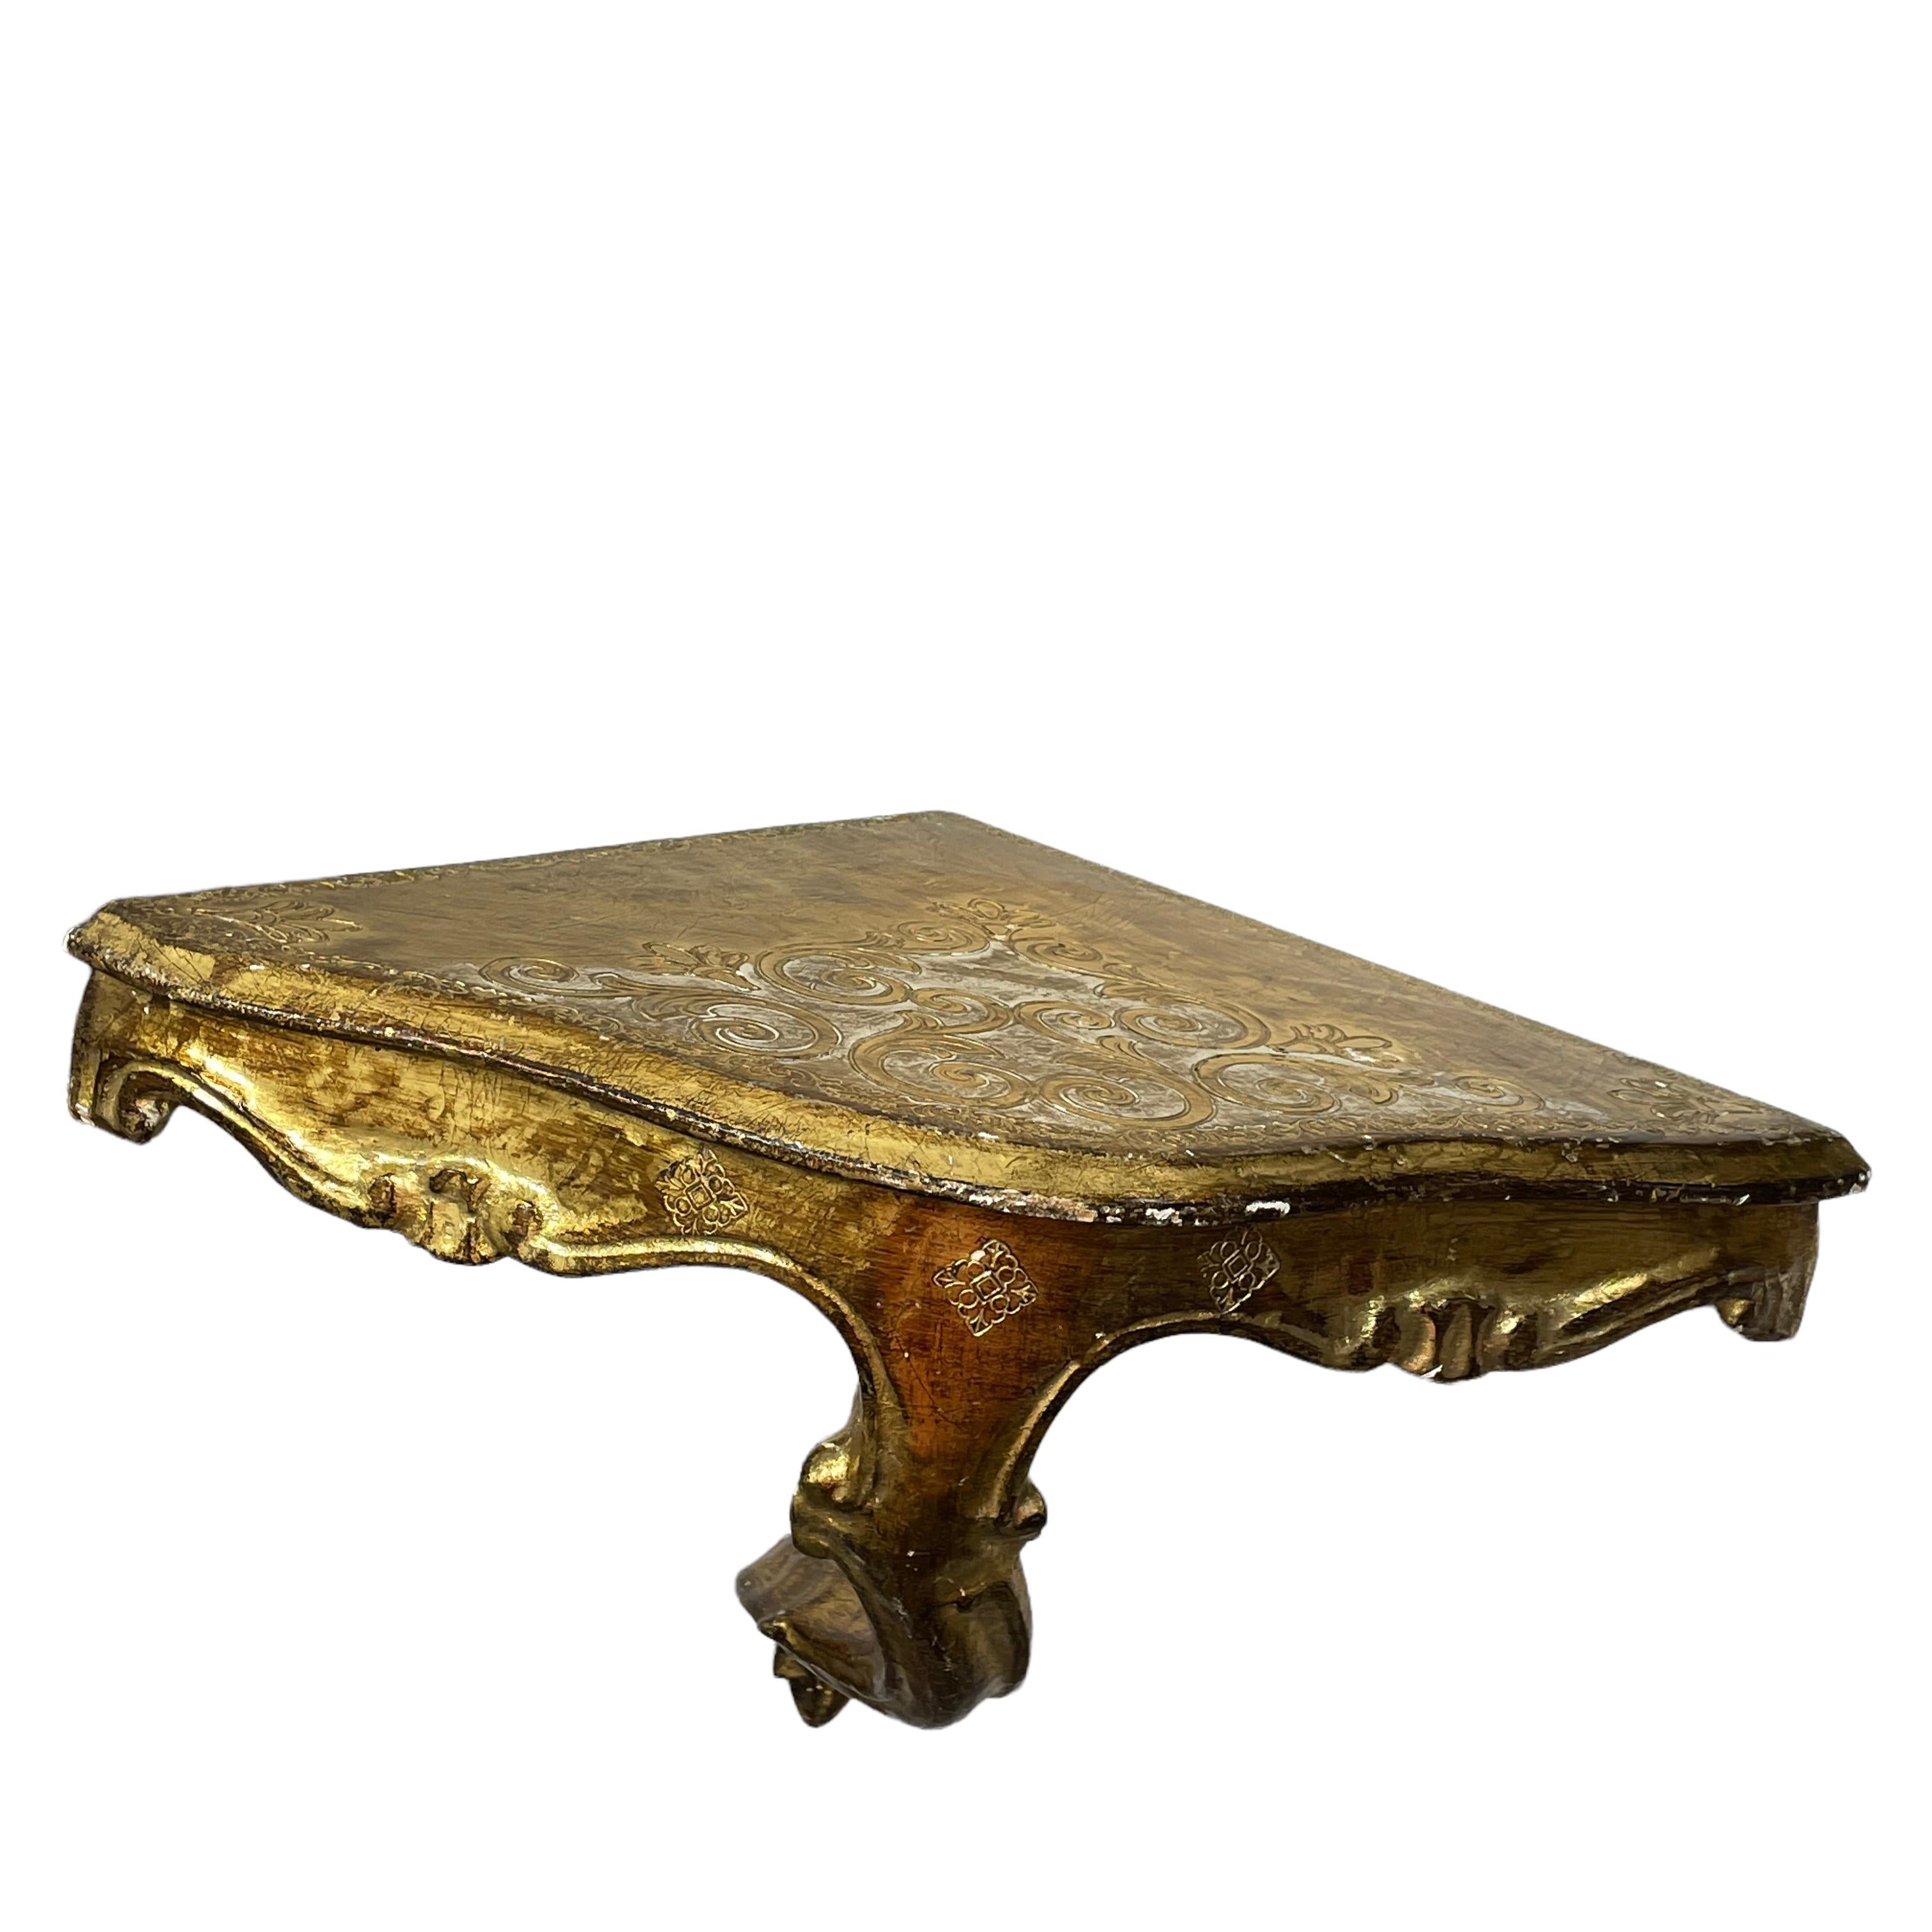 Vintage Florence Wall Corner Shelf Console, Gilded Carved Wood, Florentine Style For Sale 4